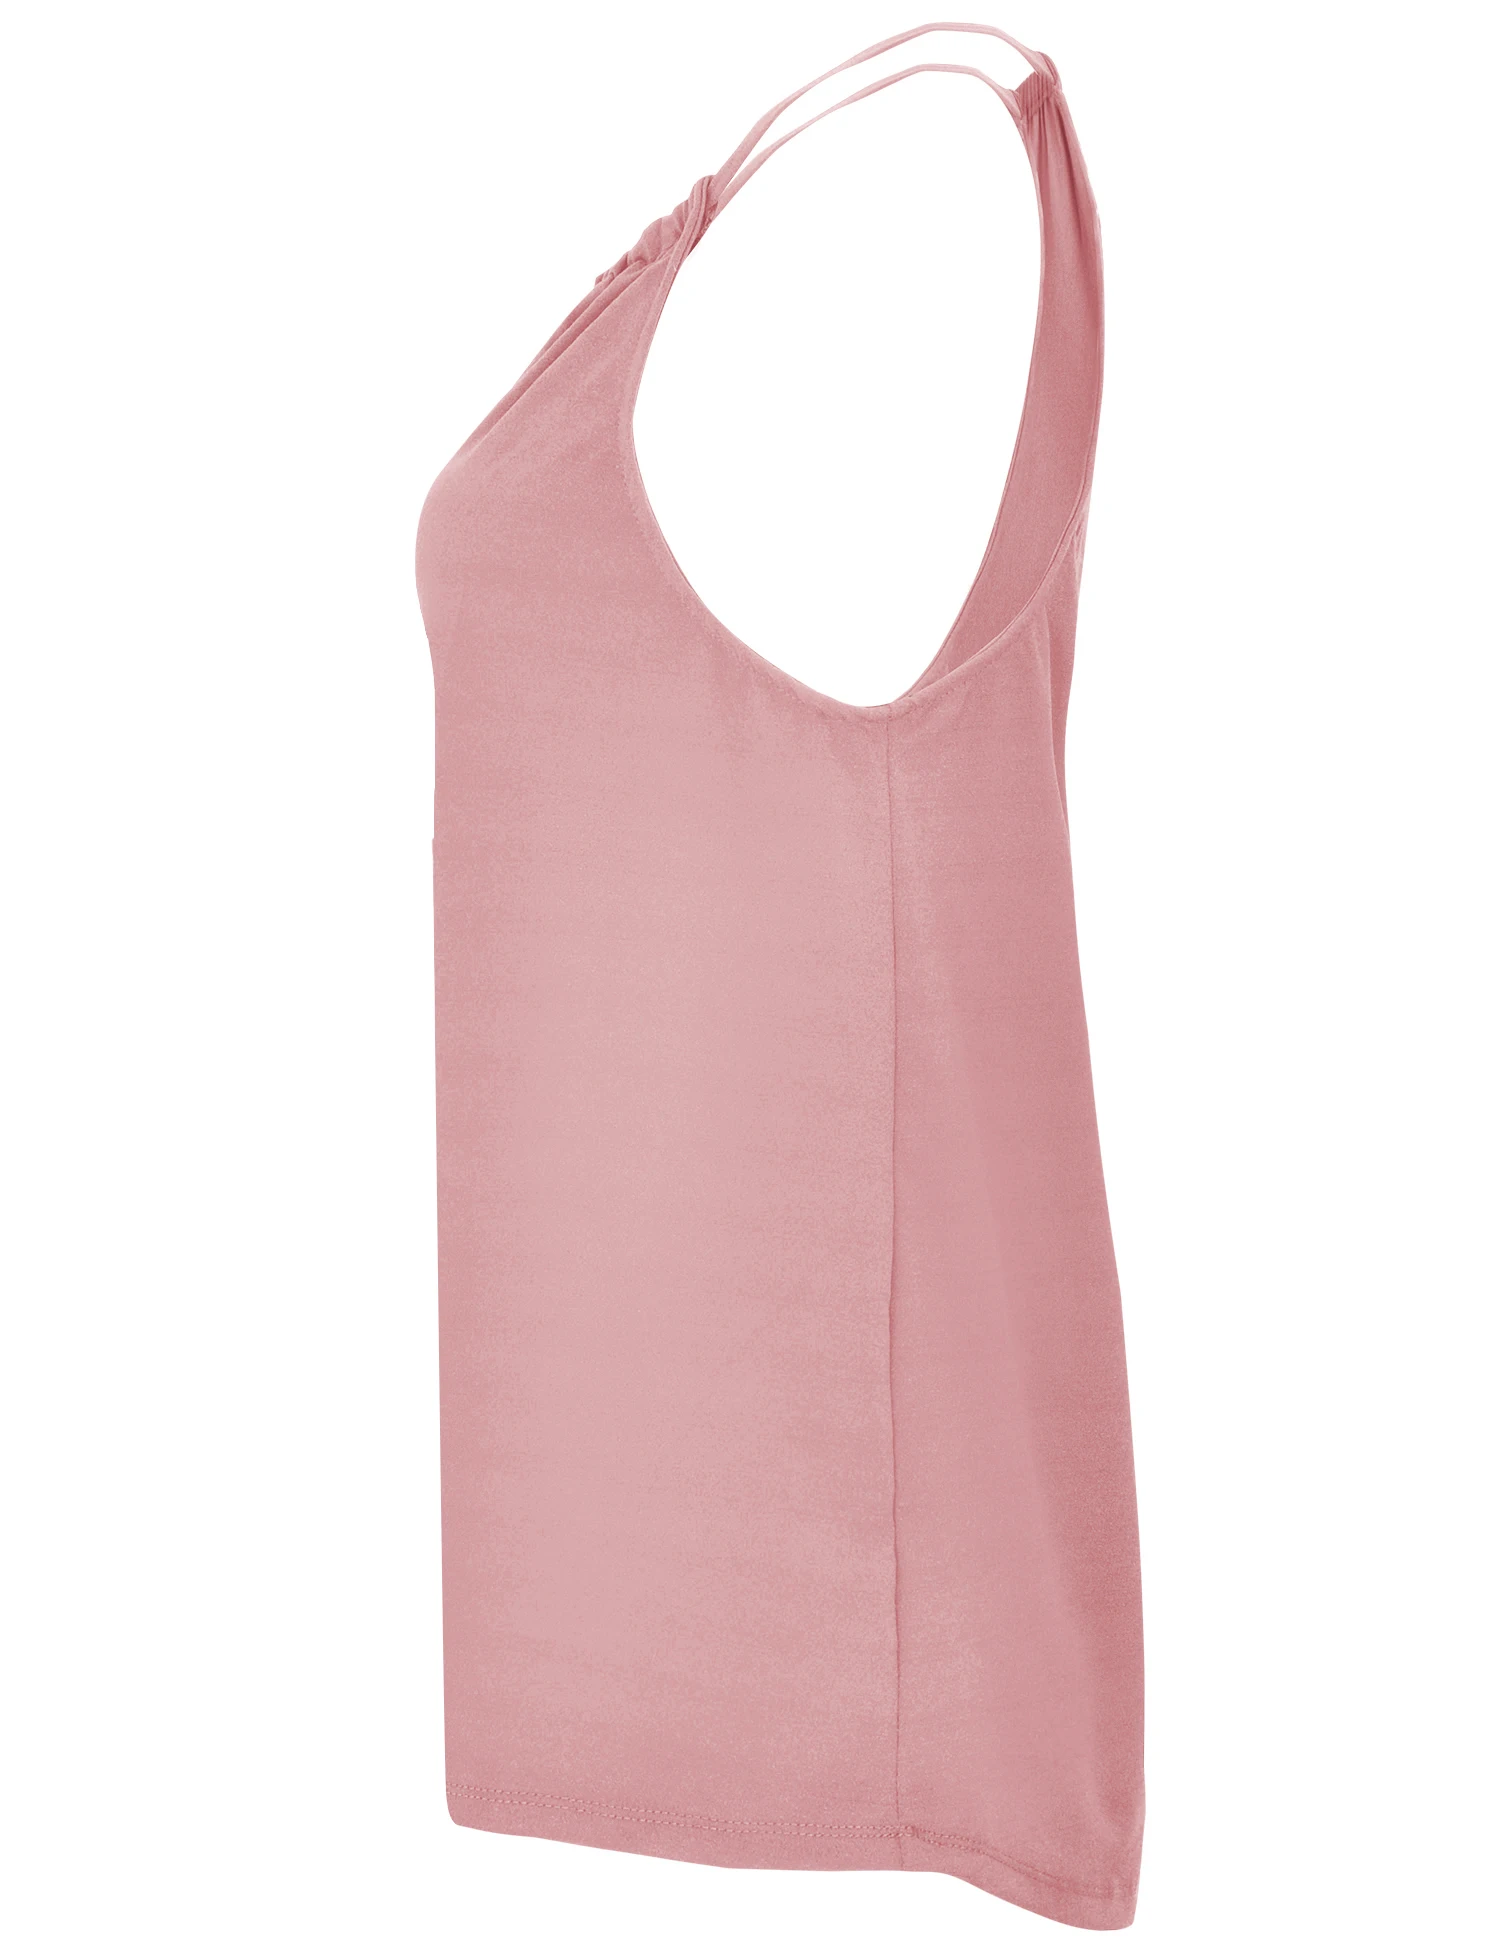 New arrival design OEM service sleeveless polyester spandex fabric chiffon slim fit halter ladies' blouses & tops